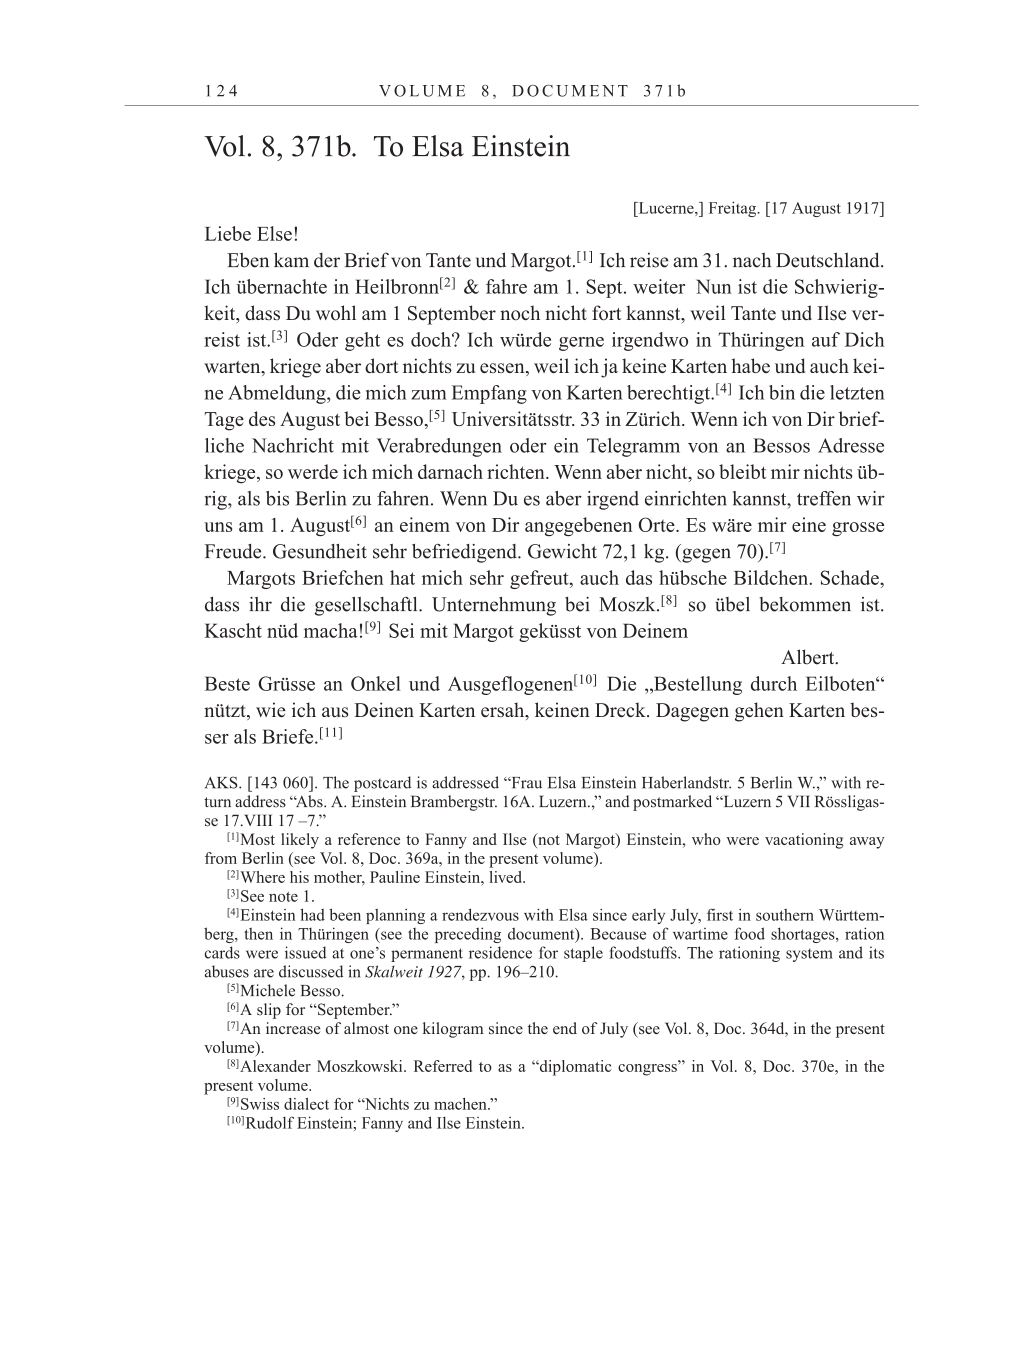 Volume 10: The Berlin Years: Correspondence May-December 1920 / Supplementary Correspondence 1909-1920 page 124